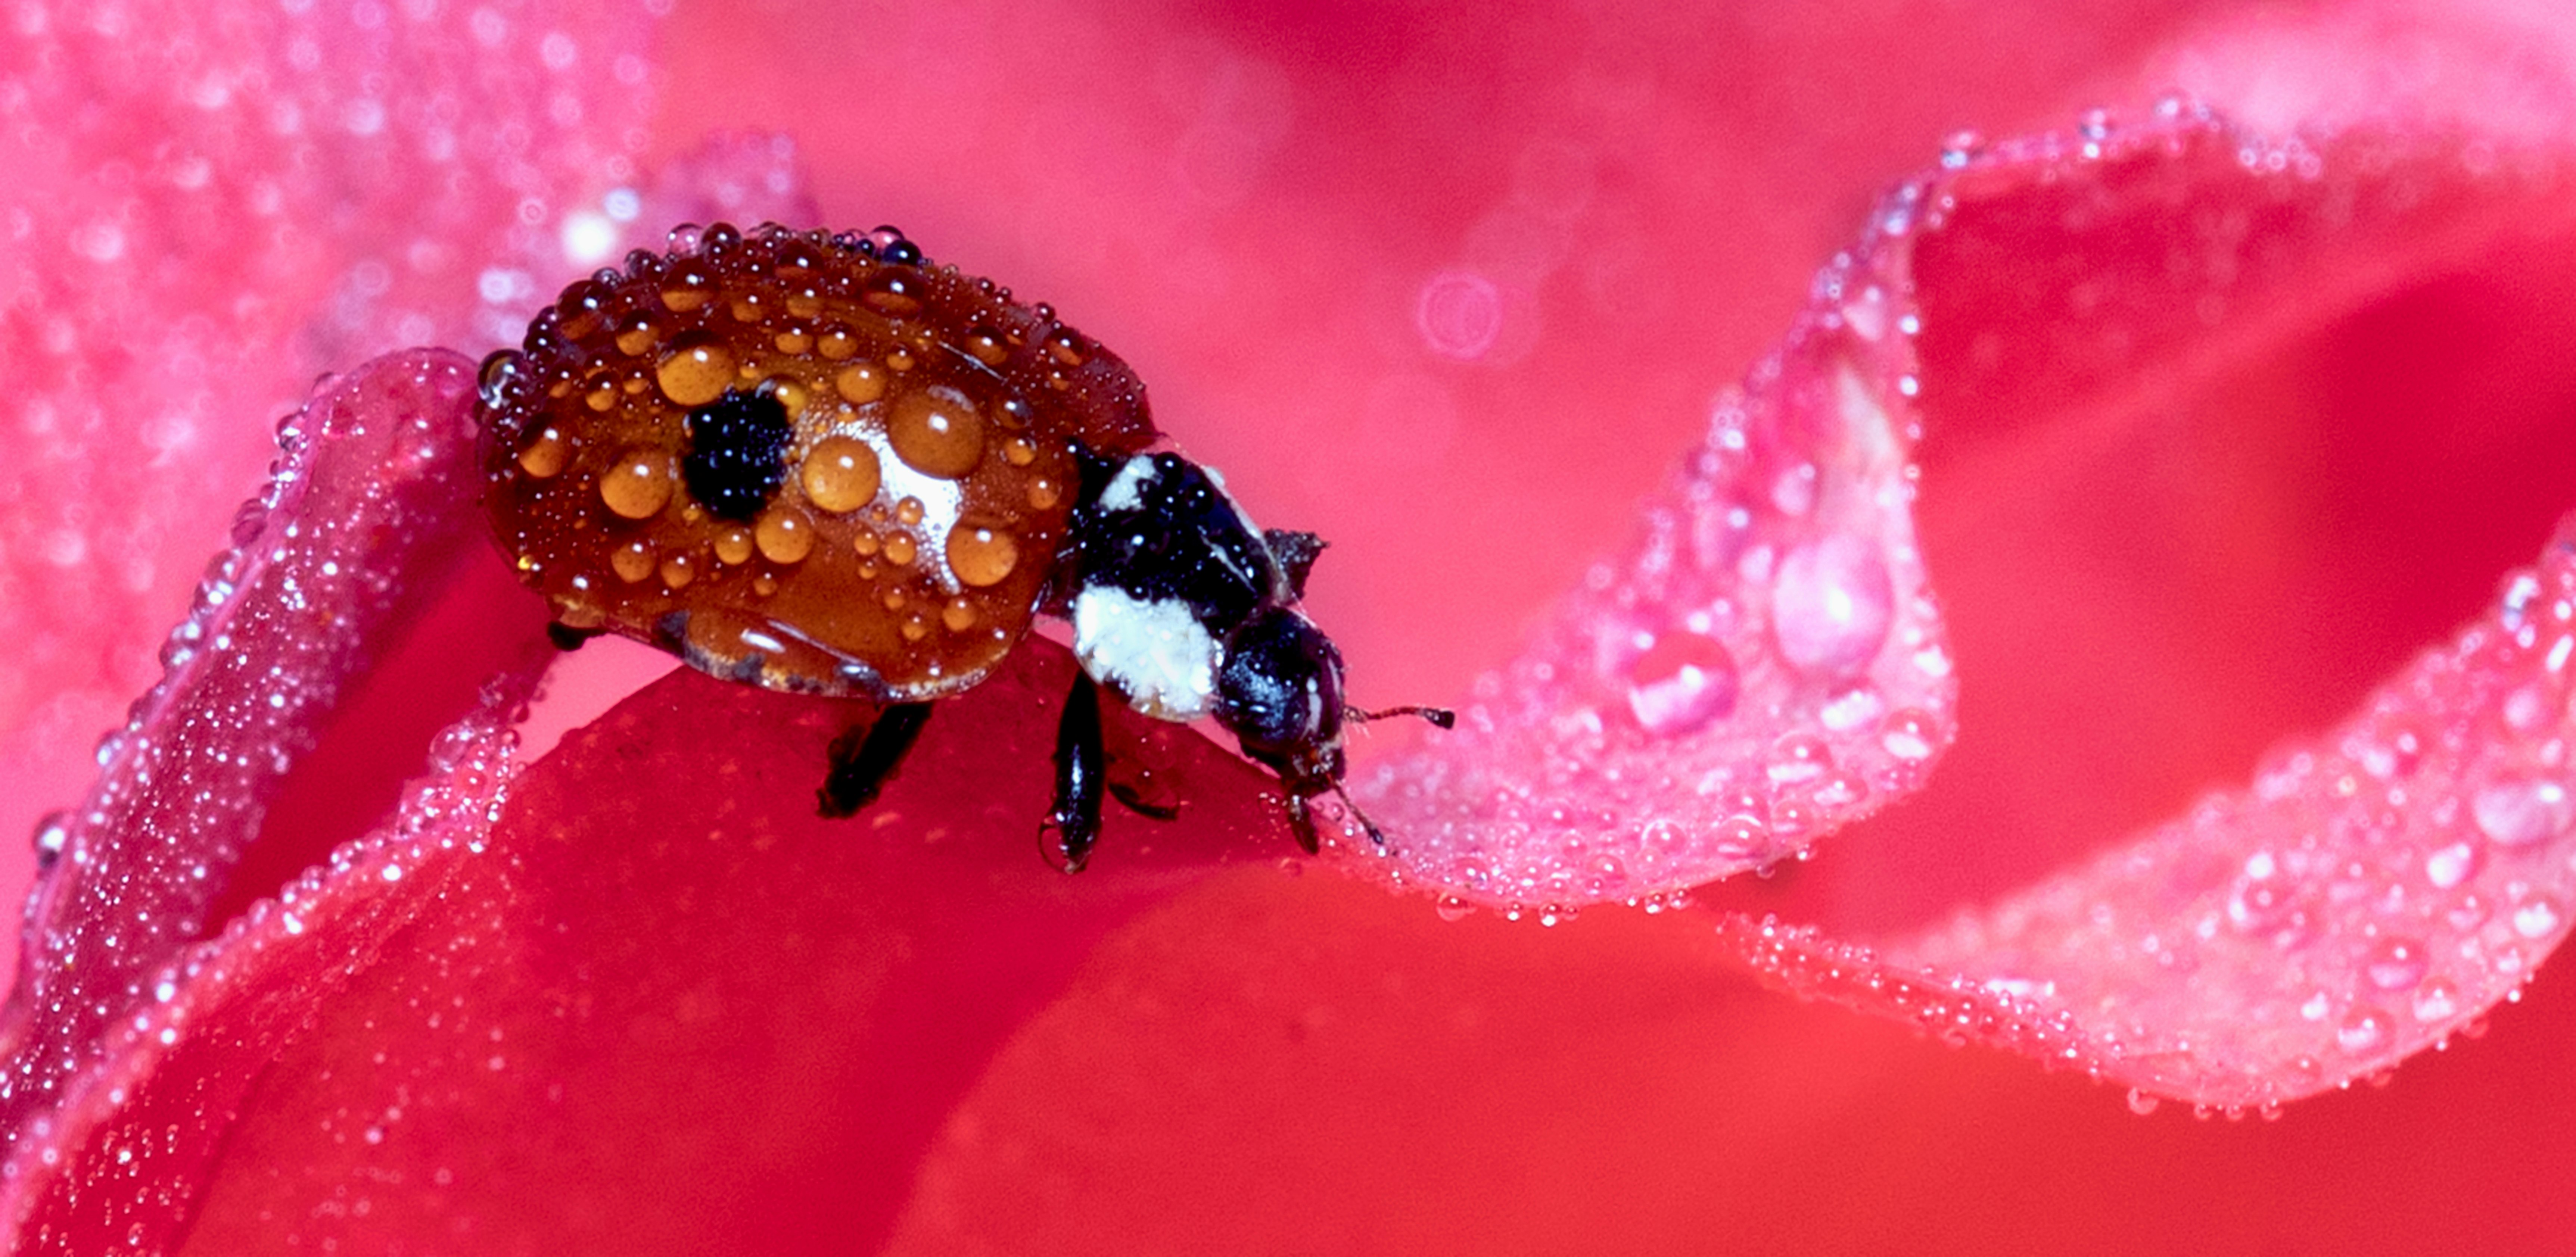 brown and black ladybug on red flower in close up photography during daytime